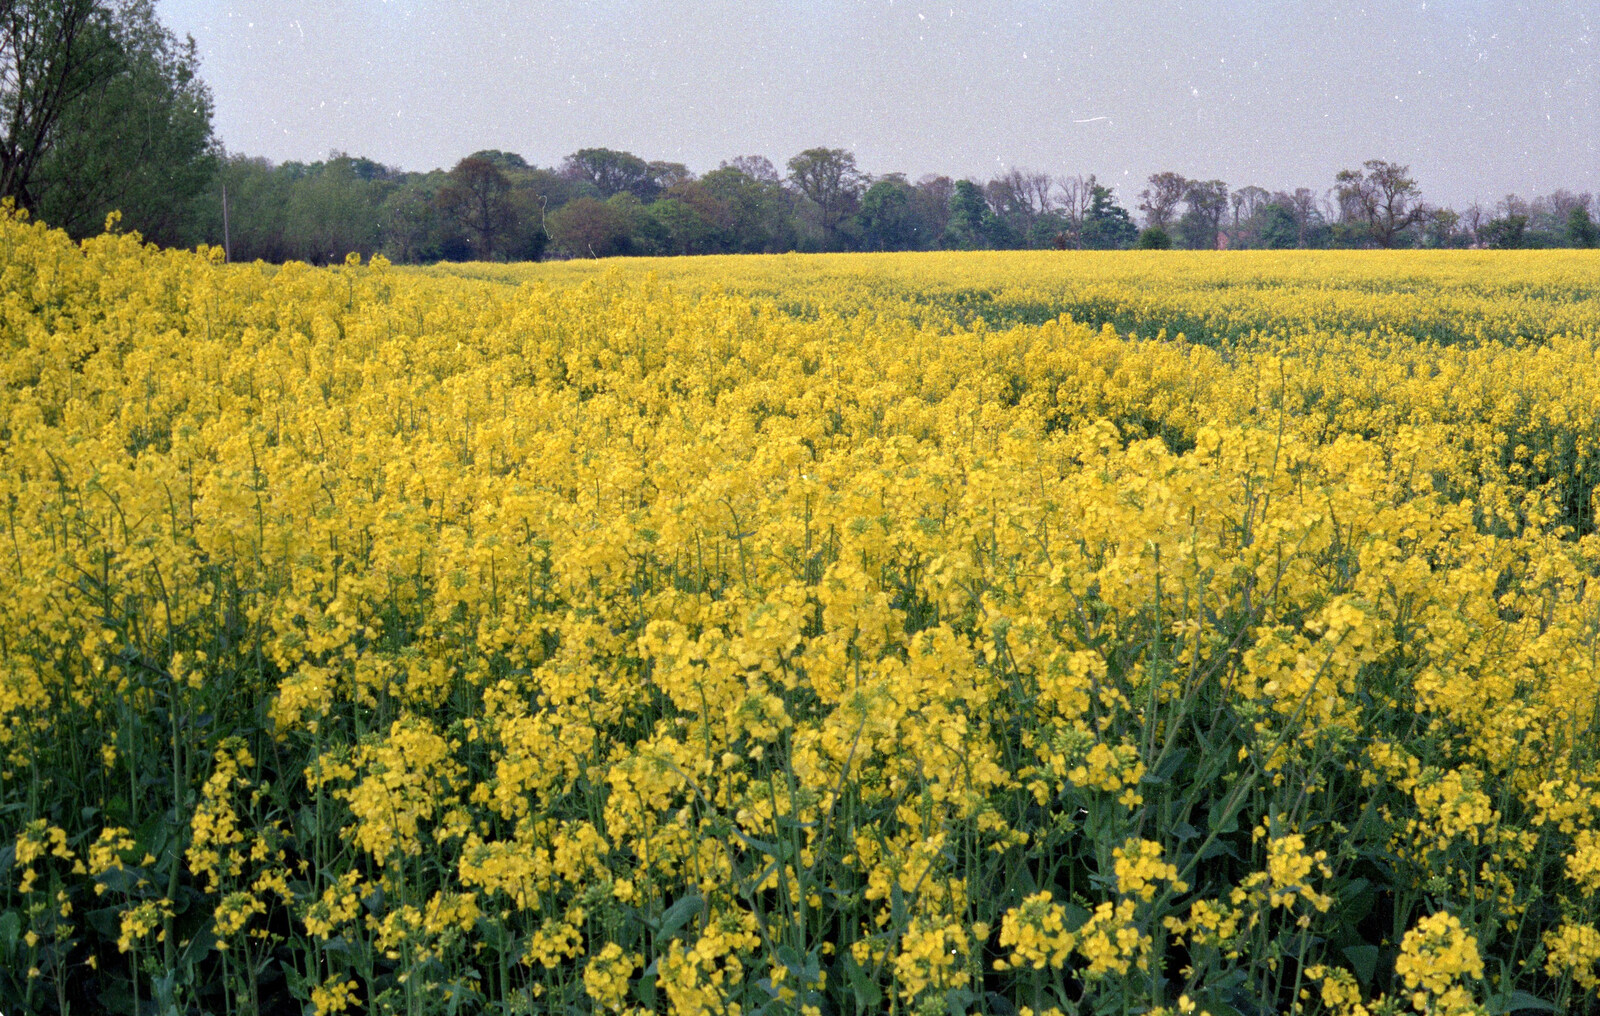 A field of bright yellow oilseed from The Plymouth Gang Visits Nosher in the Sticks, Red House, Buxton, Norfolk - 20th May 1988